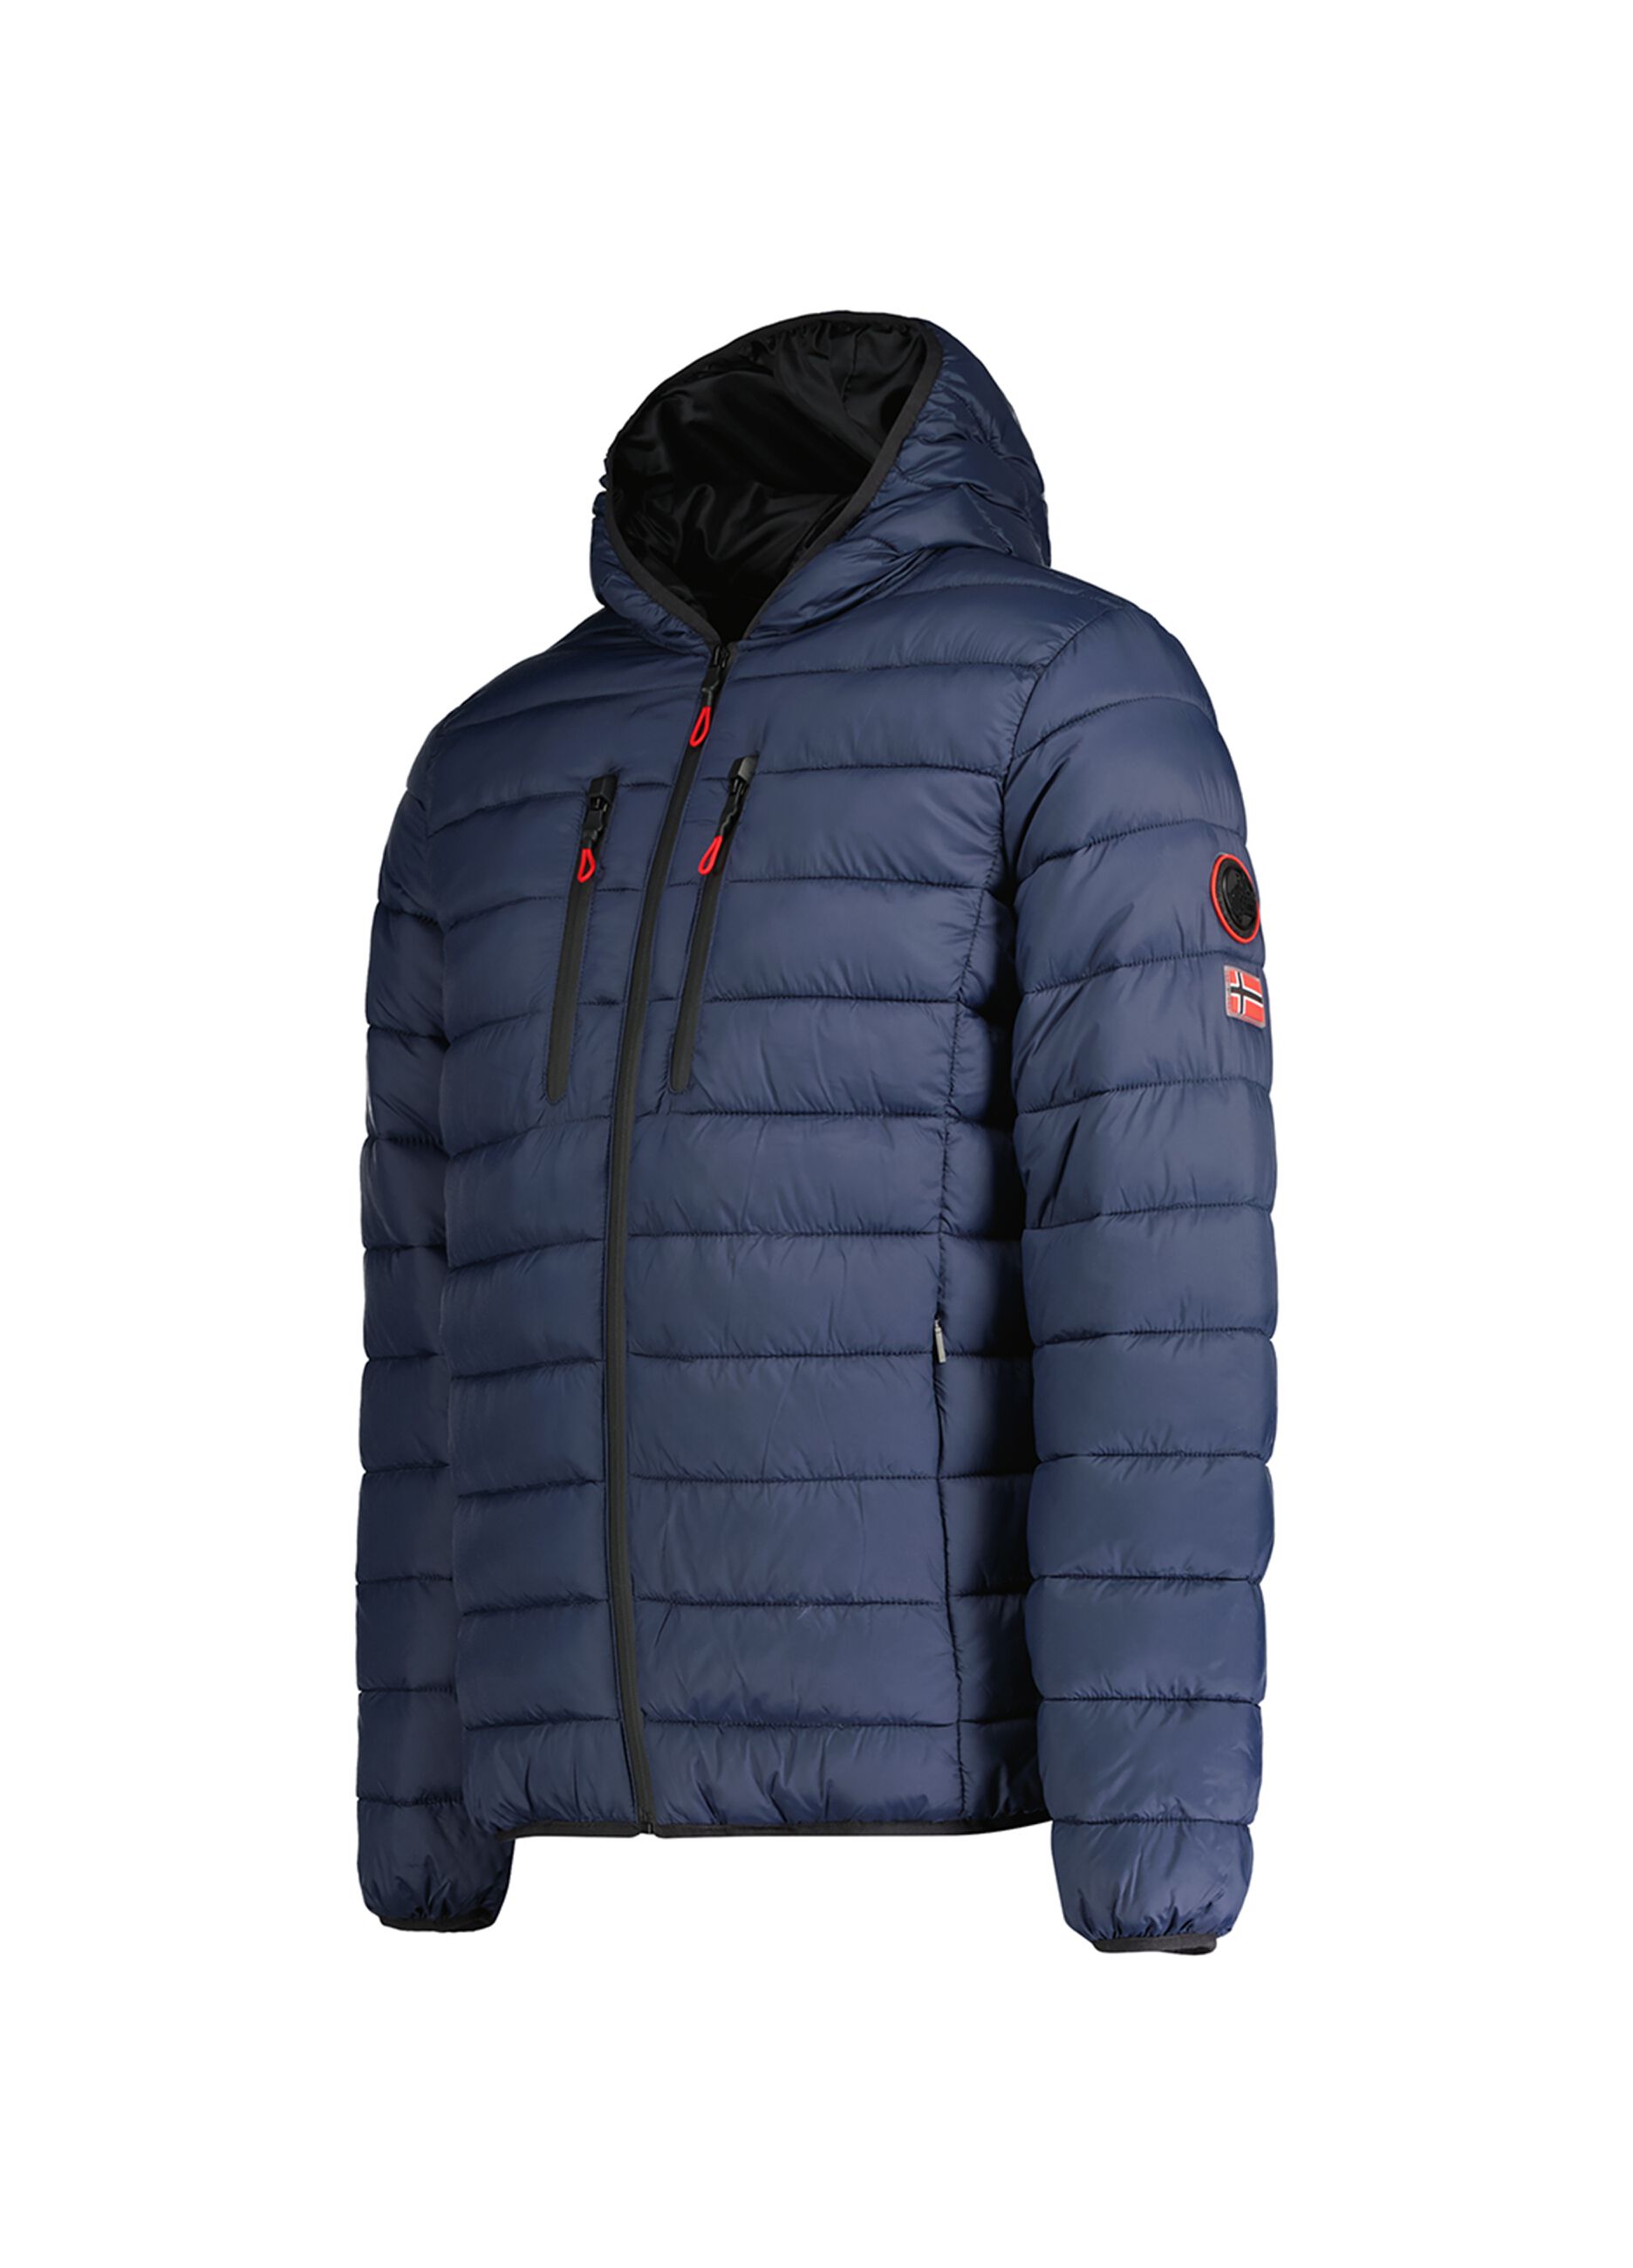 Geographical Norway down jacket with hood